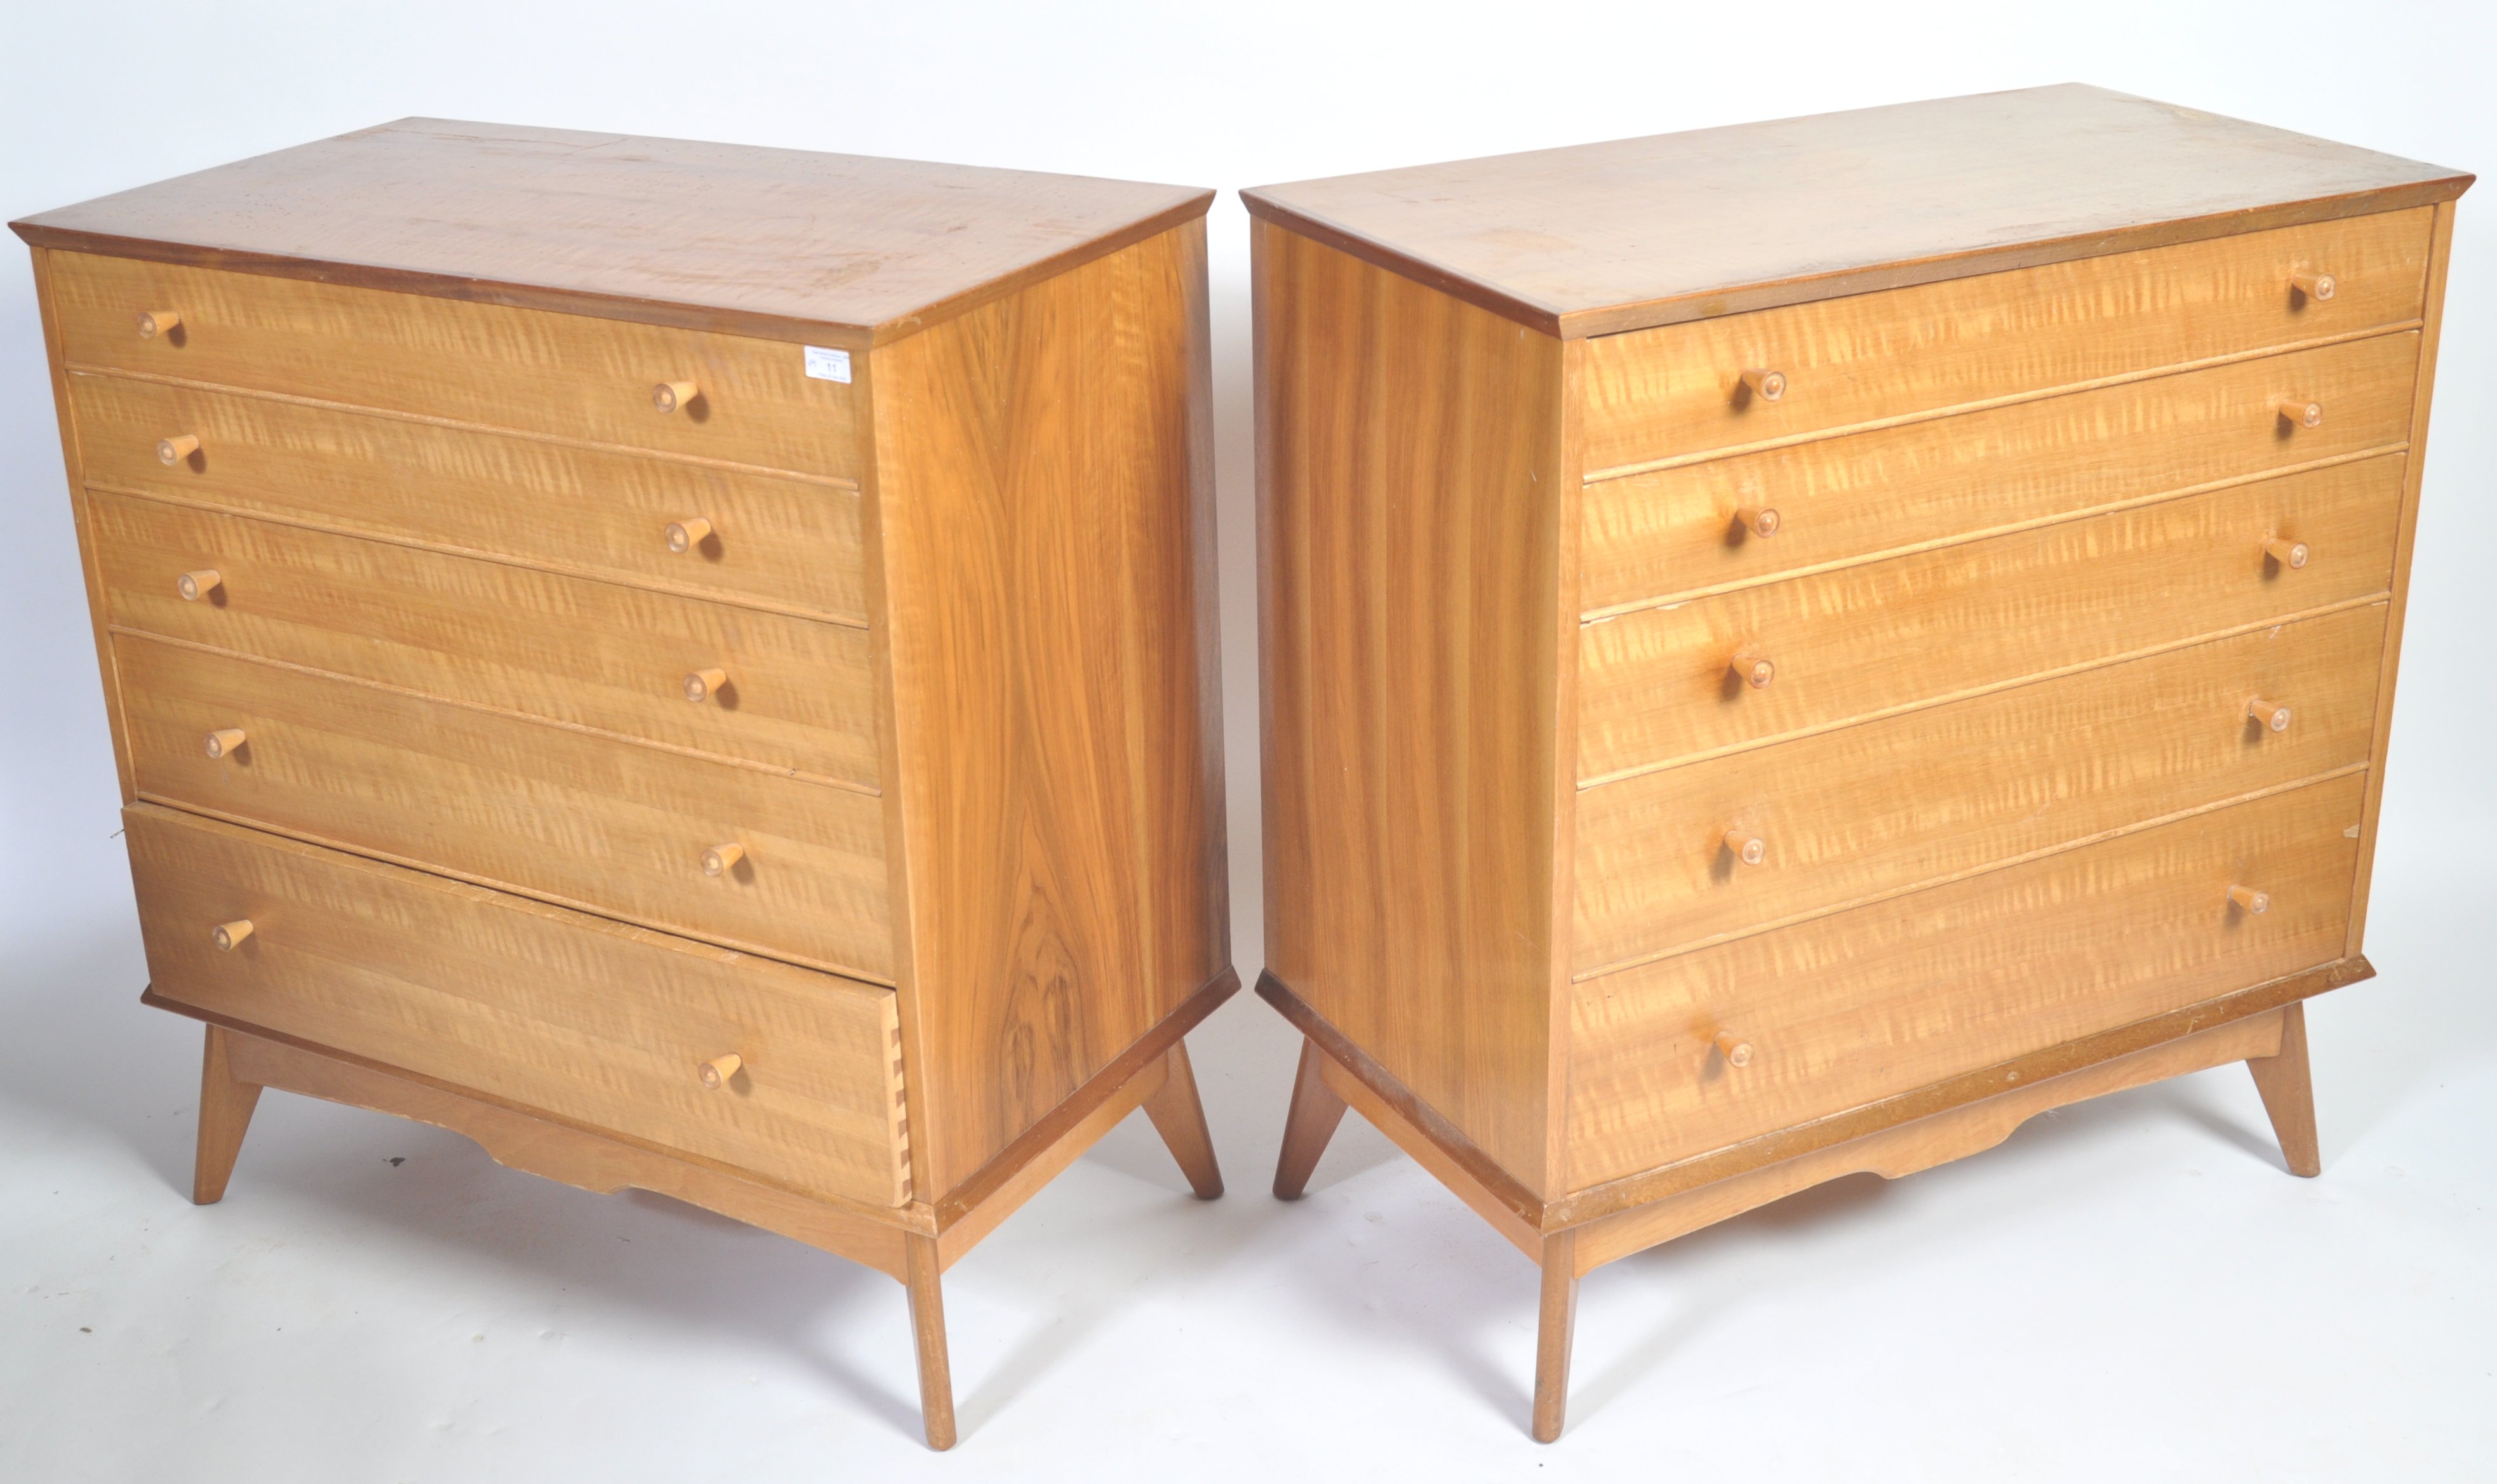 AC FURNITURE MID CENTURY CHESTS OF DRAWERS BY ALFRED COX - Image 2 of 7